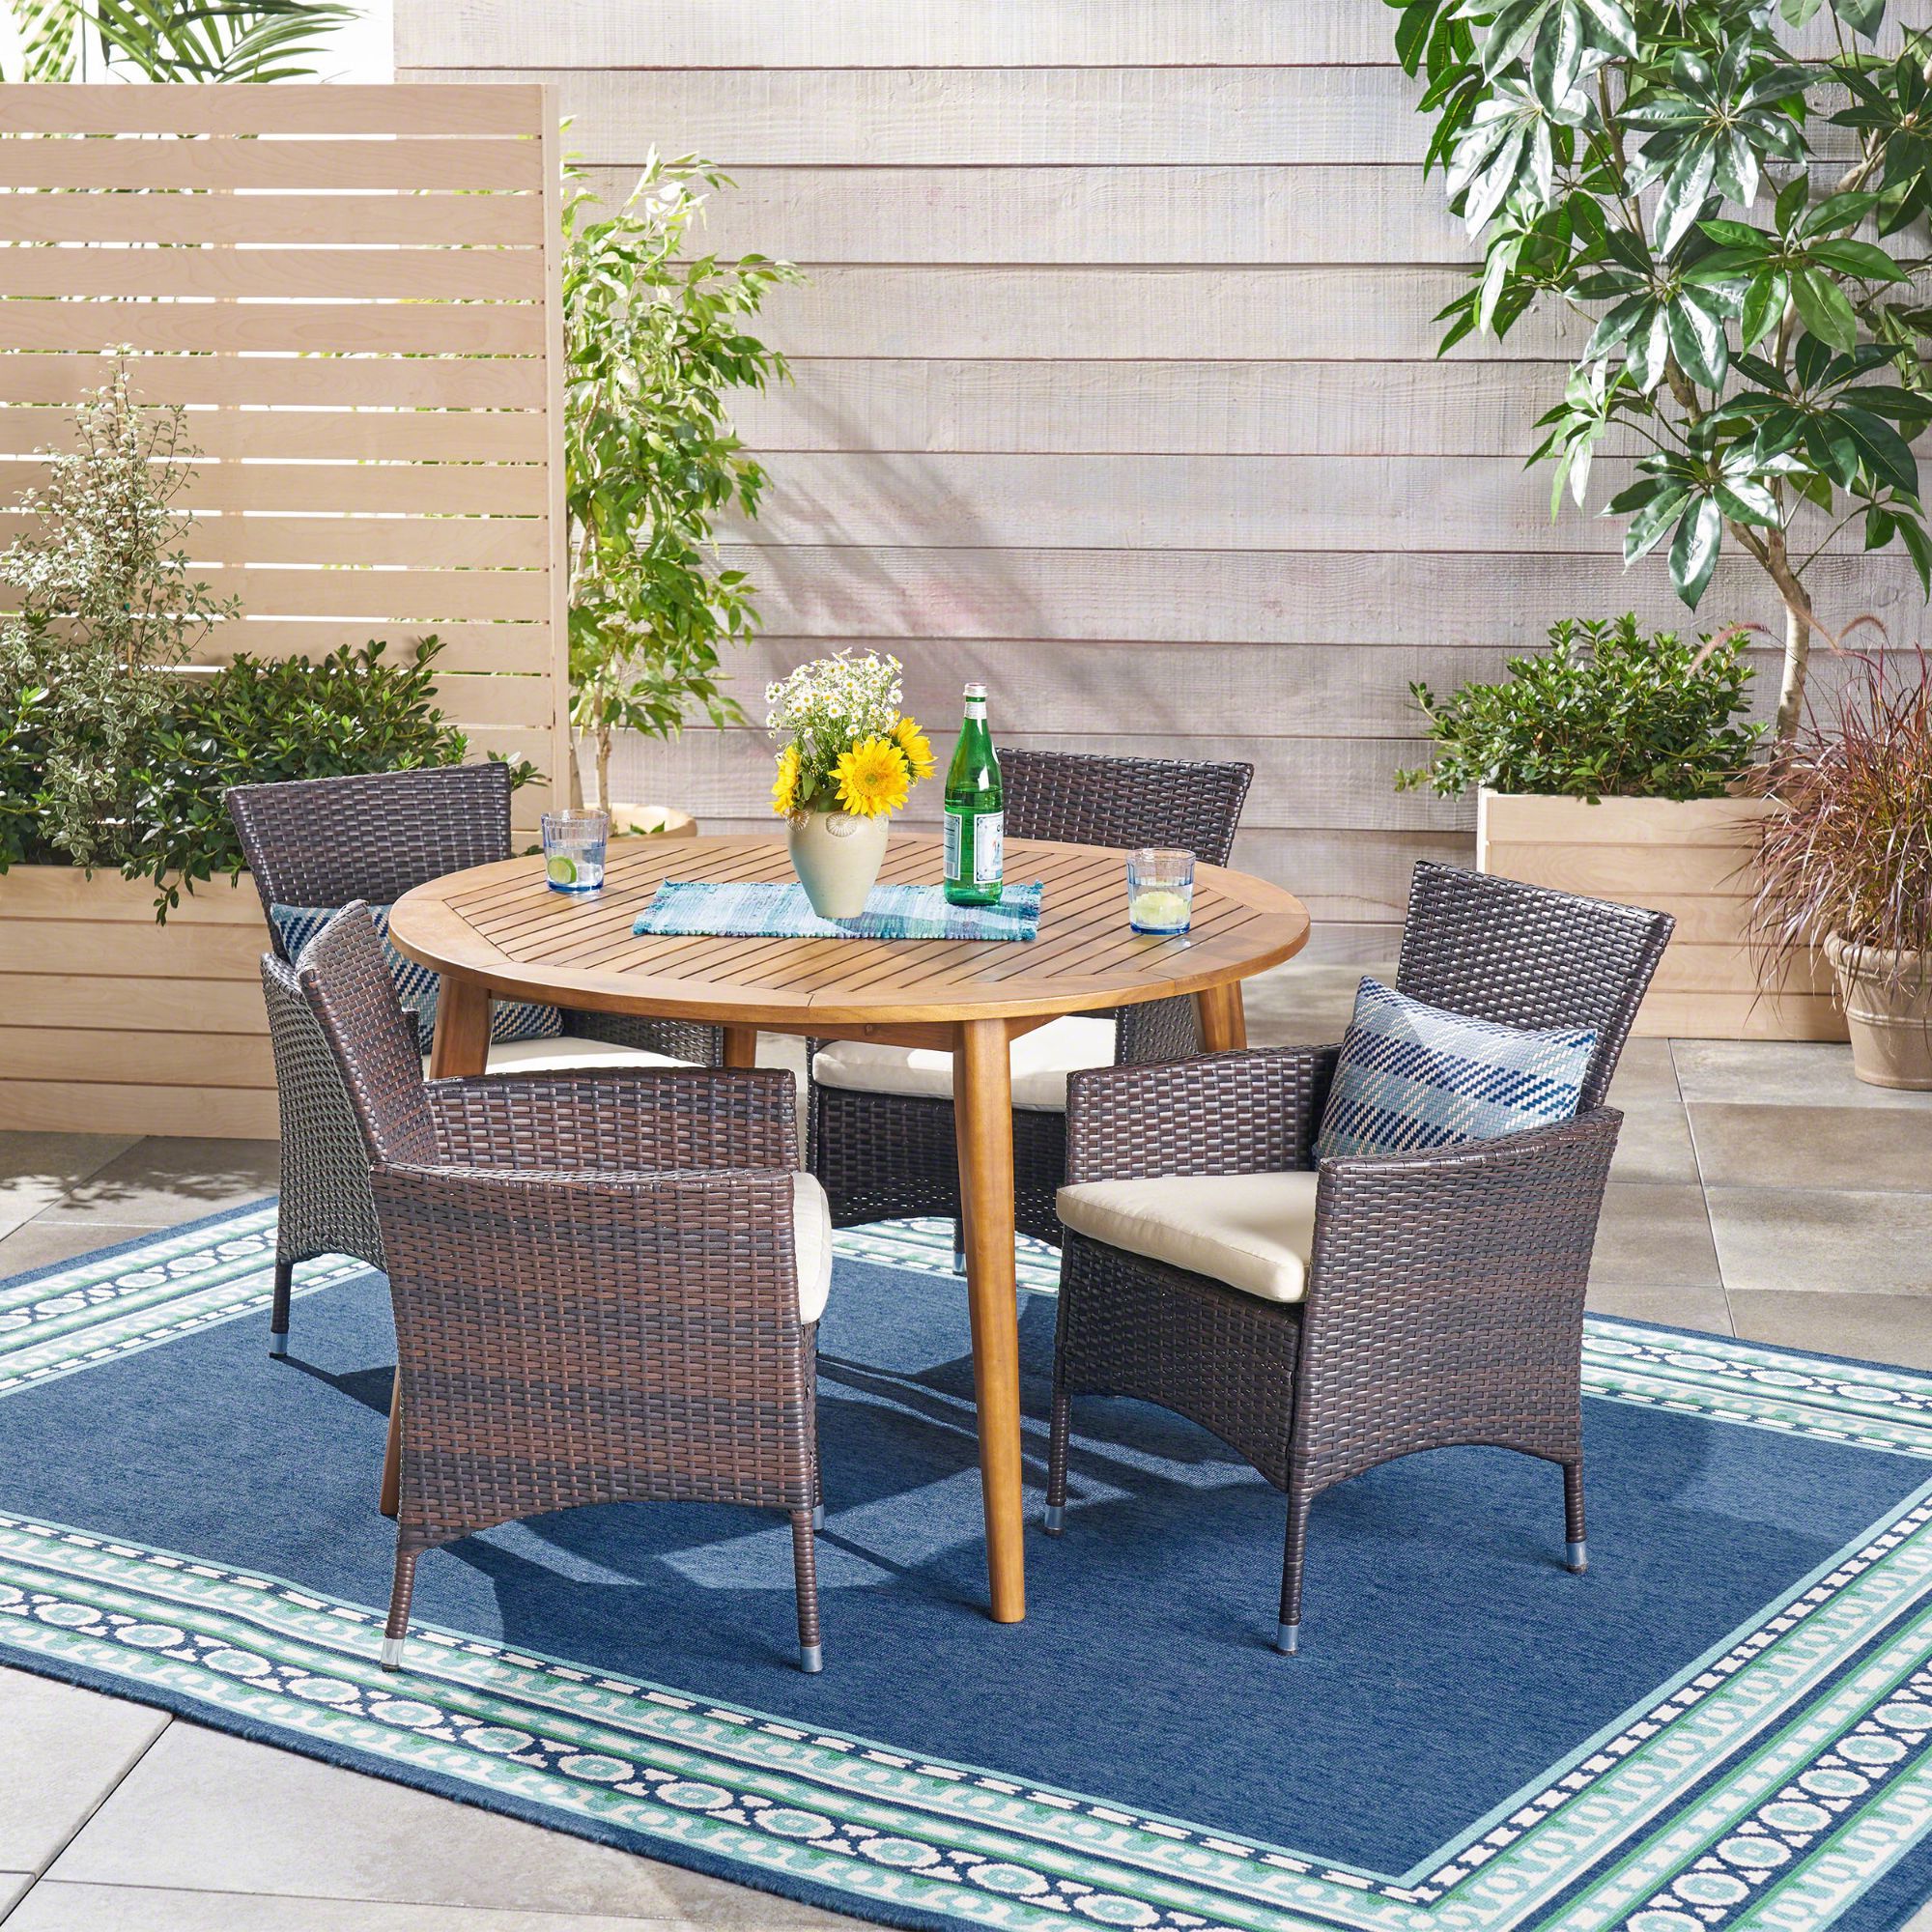 Widely Used Green 5 Piece Outdoor Dining Sets Intended For 5 Piece Brown Wicker Finish Round Outdoor Furniture Patio Dining Set (View 9 of 15)